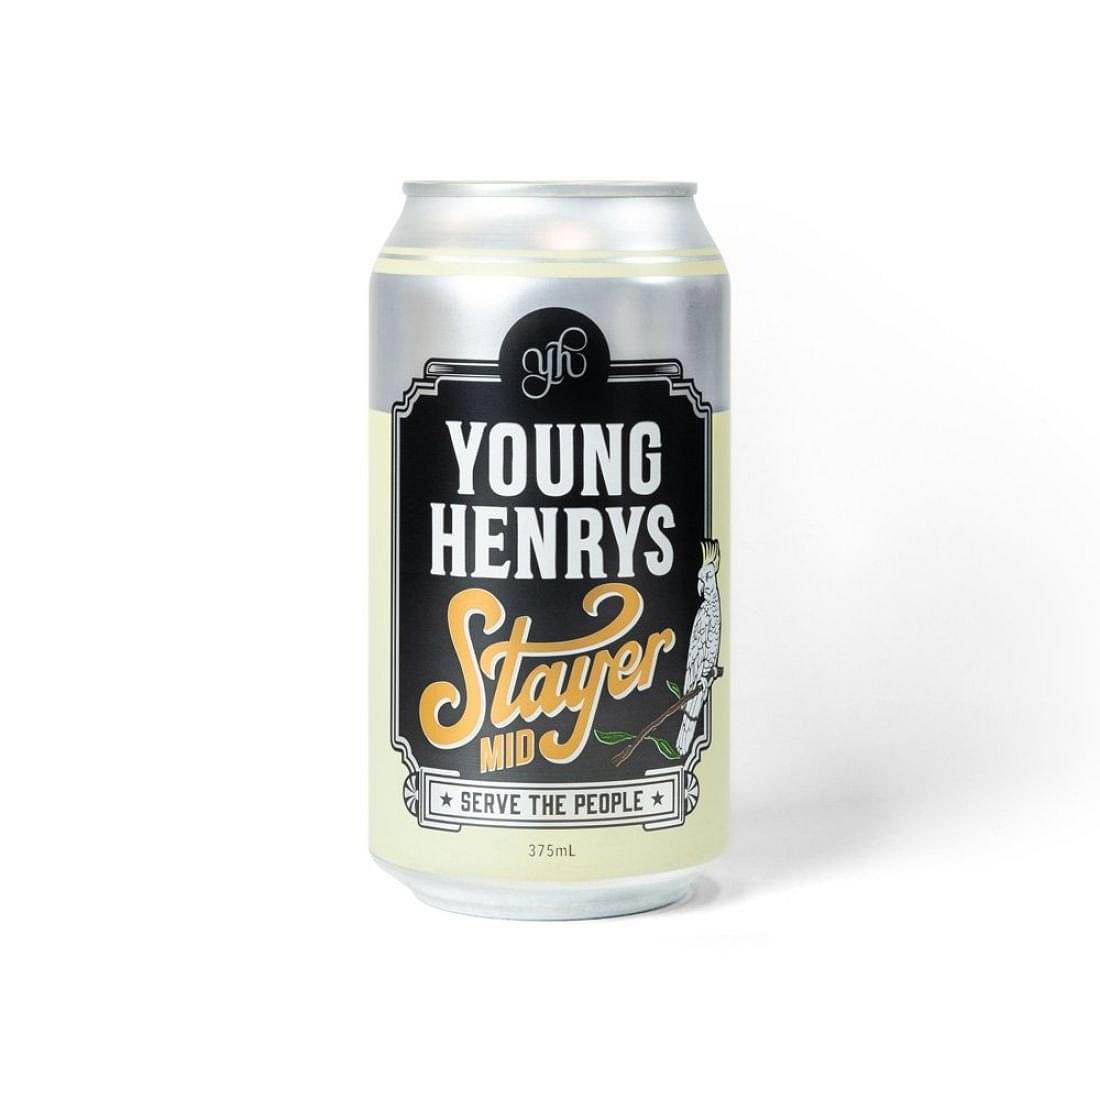 Young Henrys Stayer (Mid Strength)